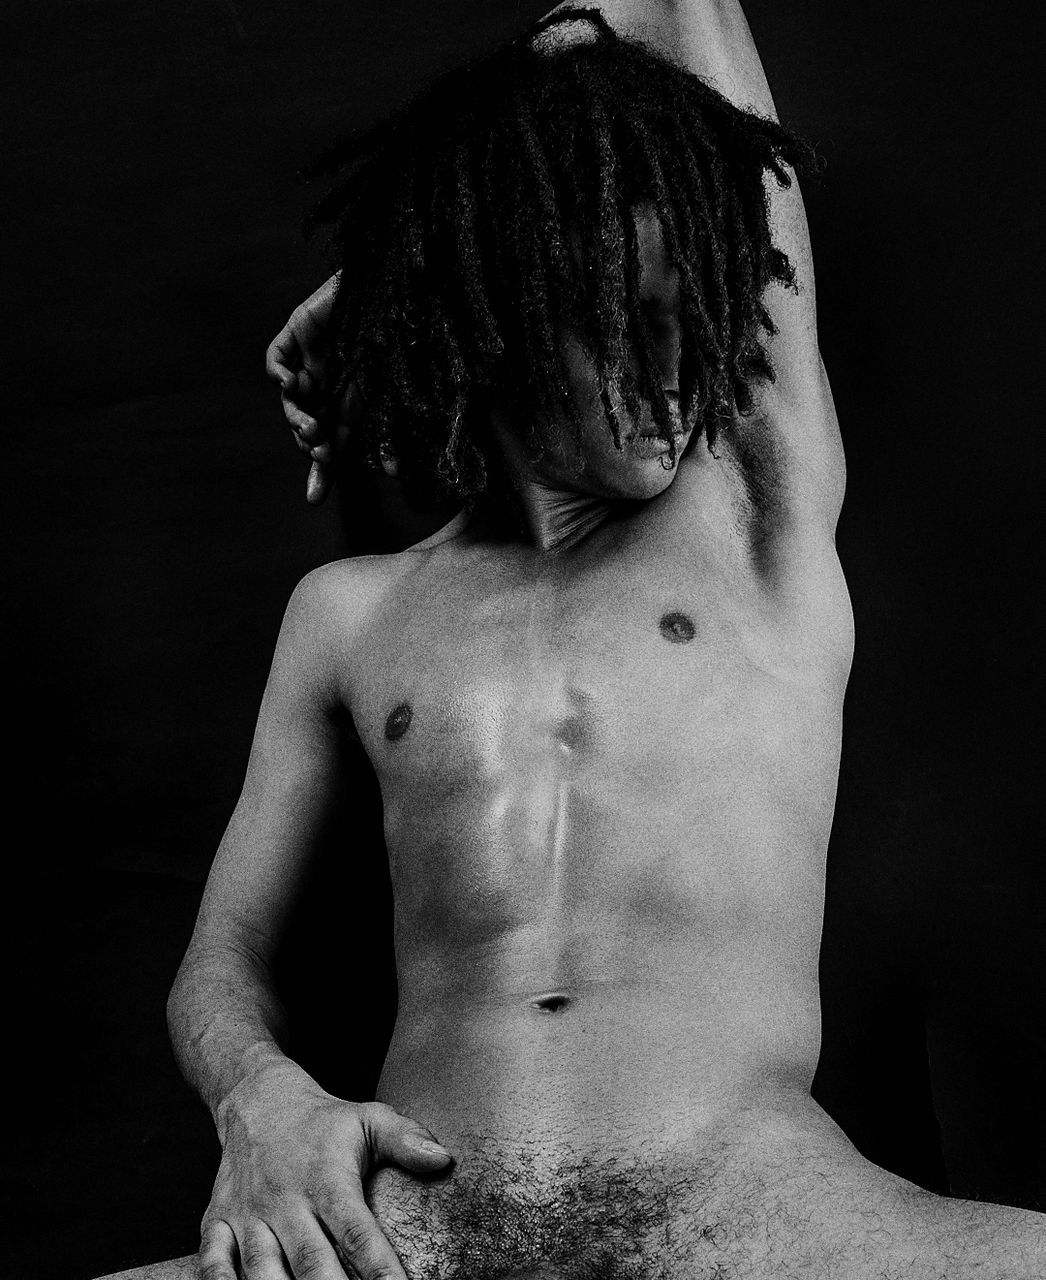 black and white, one person, black, monochrome photography, adult, monochrome, black background, studio shot, indoors, back, white, arm, muscular build, young adult, men, lifestyles, person, barechested, portrait, waist up, rear view, hairstyle, strength, close-up